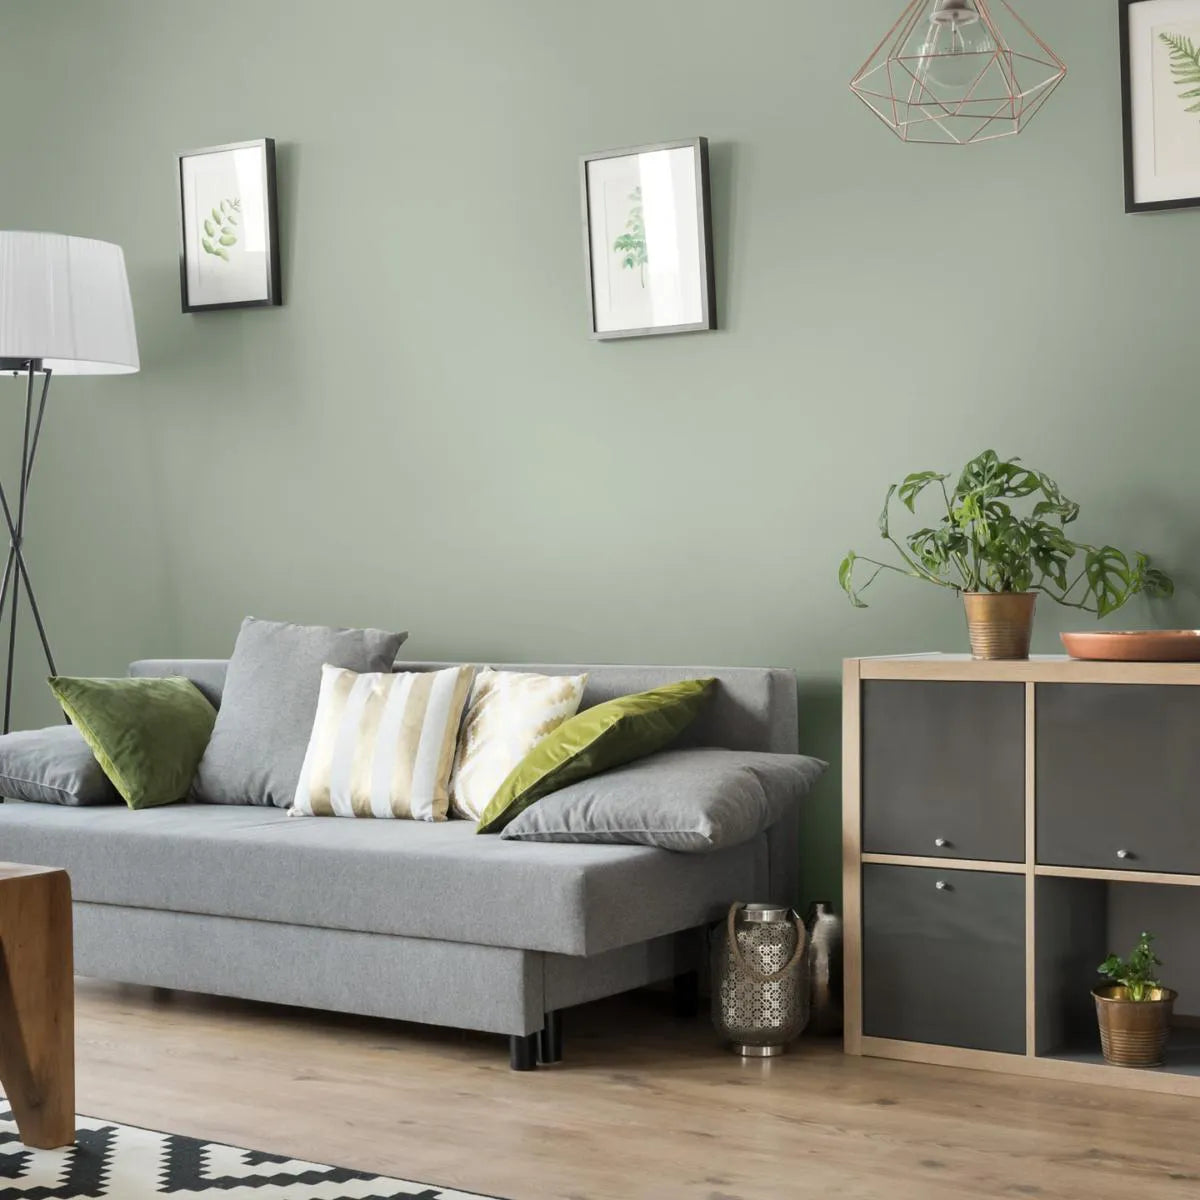 Colourtrend Schoolroom Green | Same Day Delivery by Weirs of Baggot St